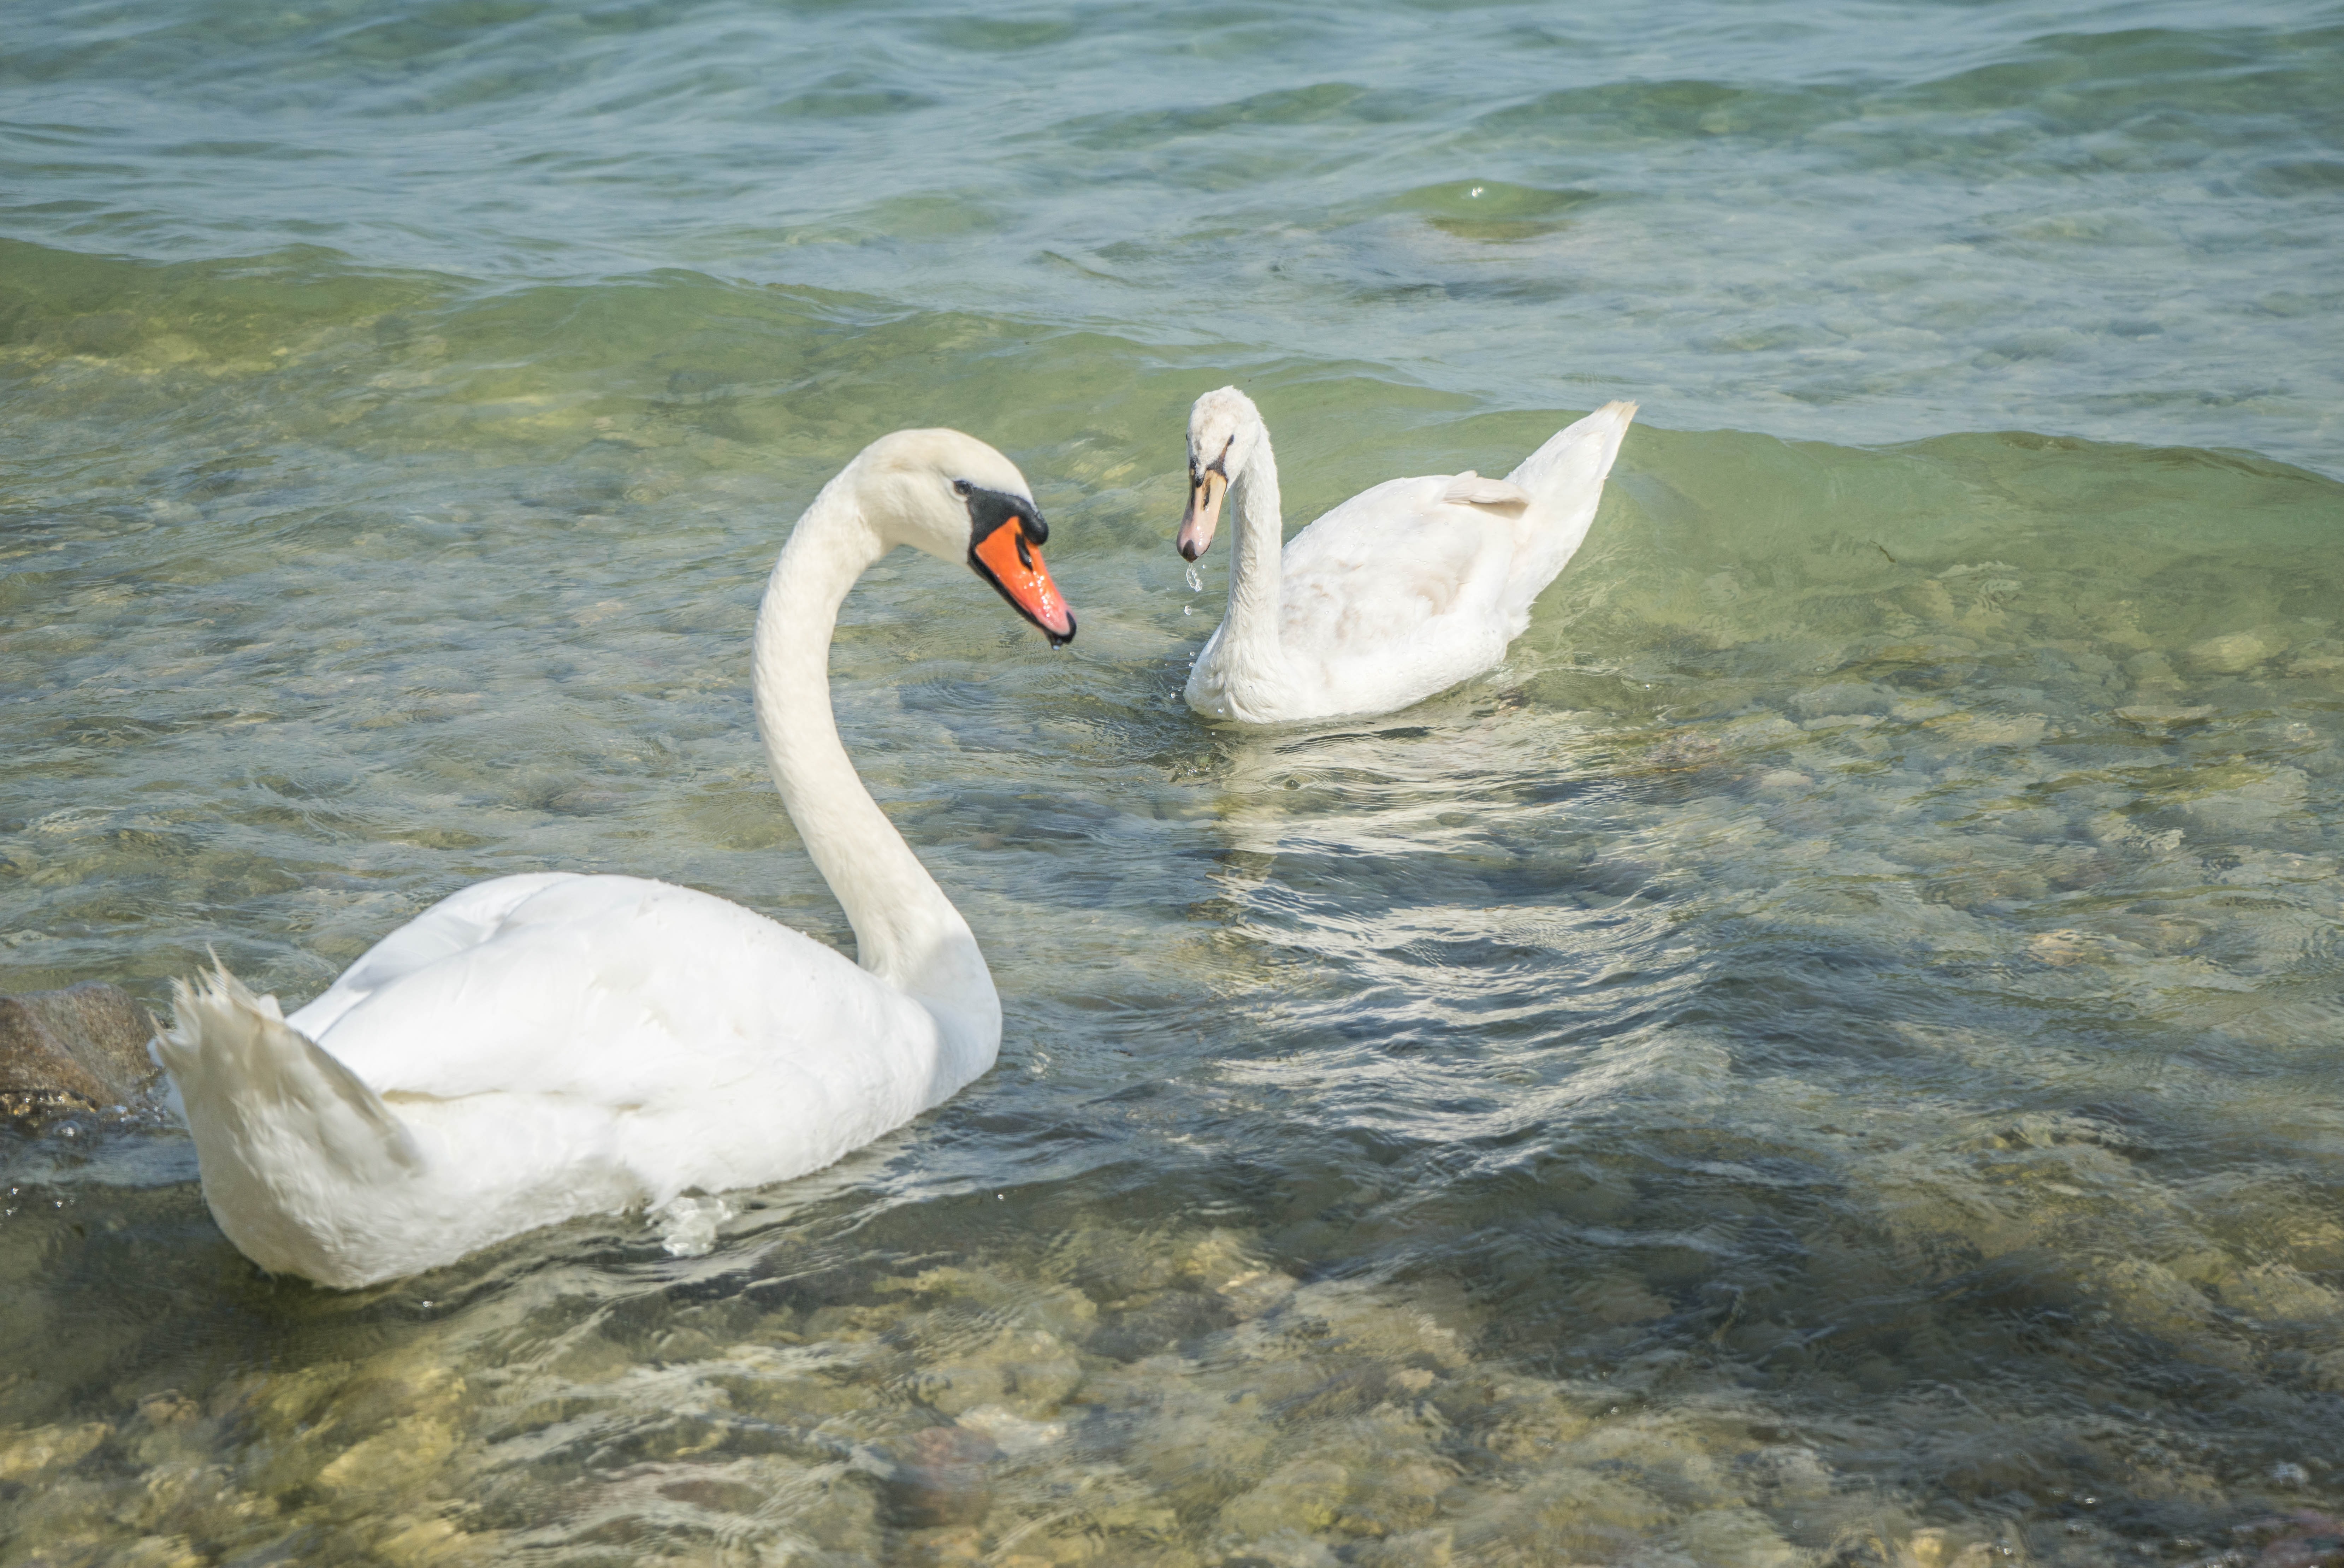 two swans top of body of water during daytime